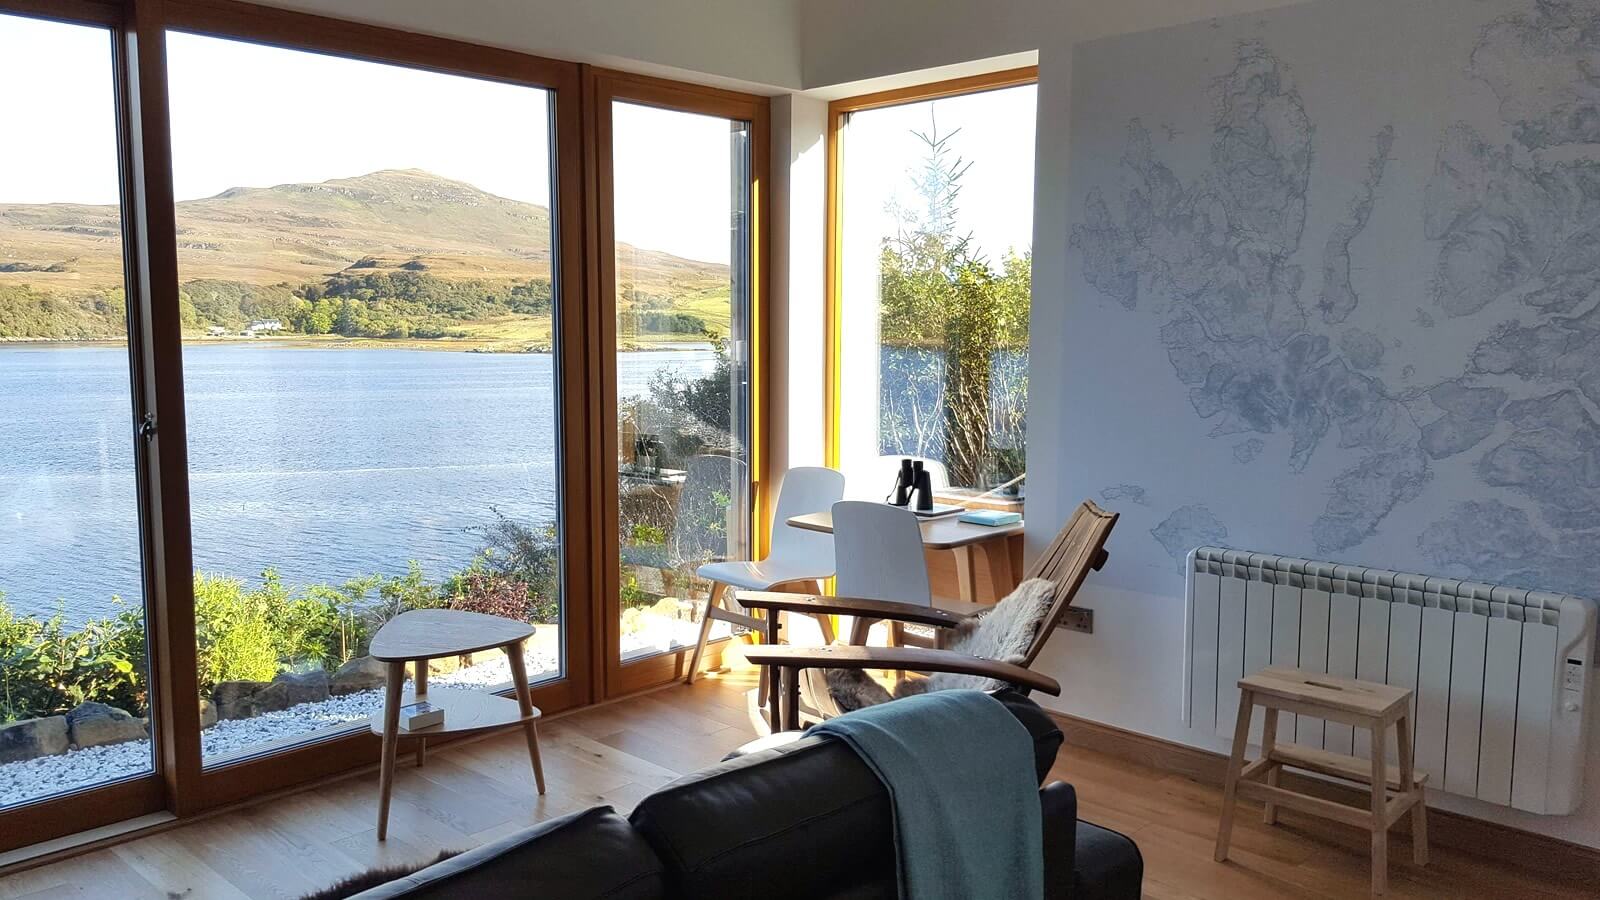 Lounge area with sea view, Skye Self Catering